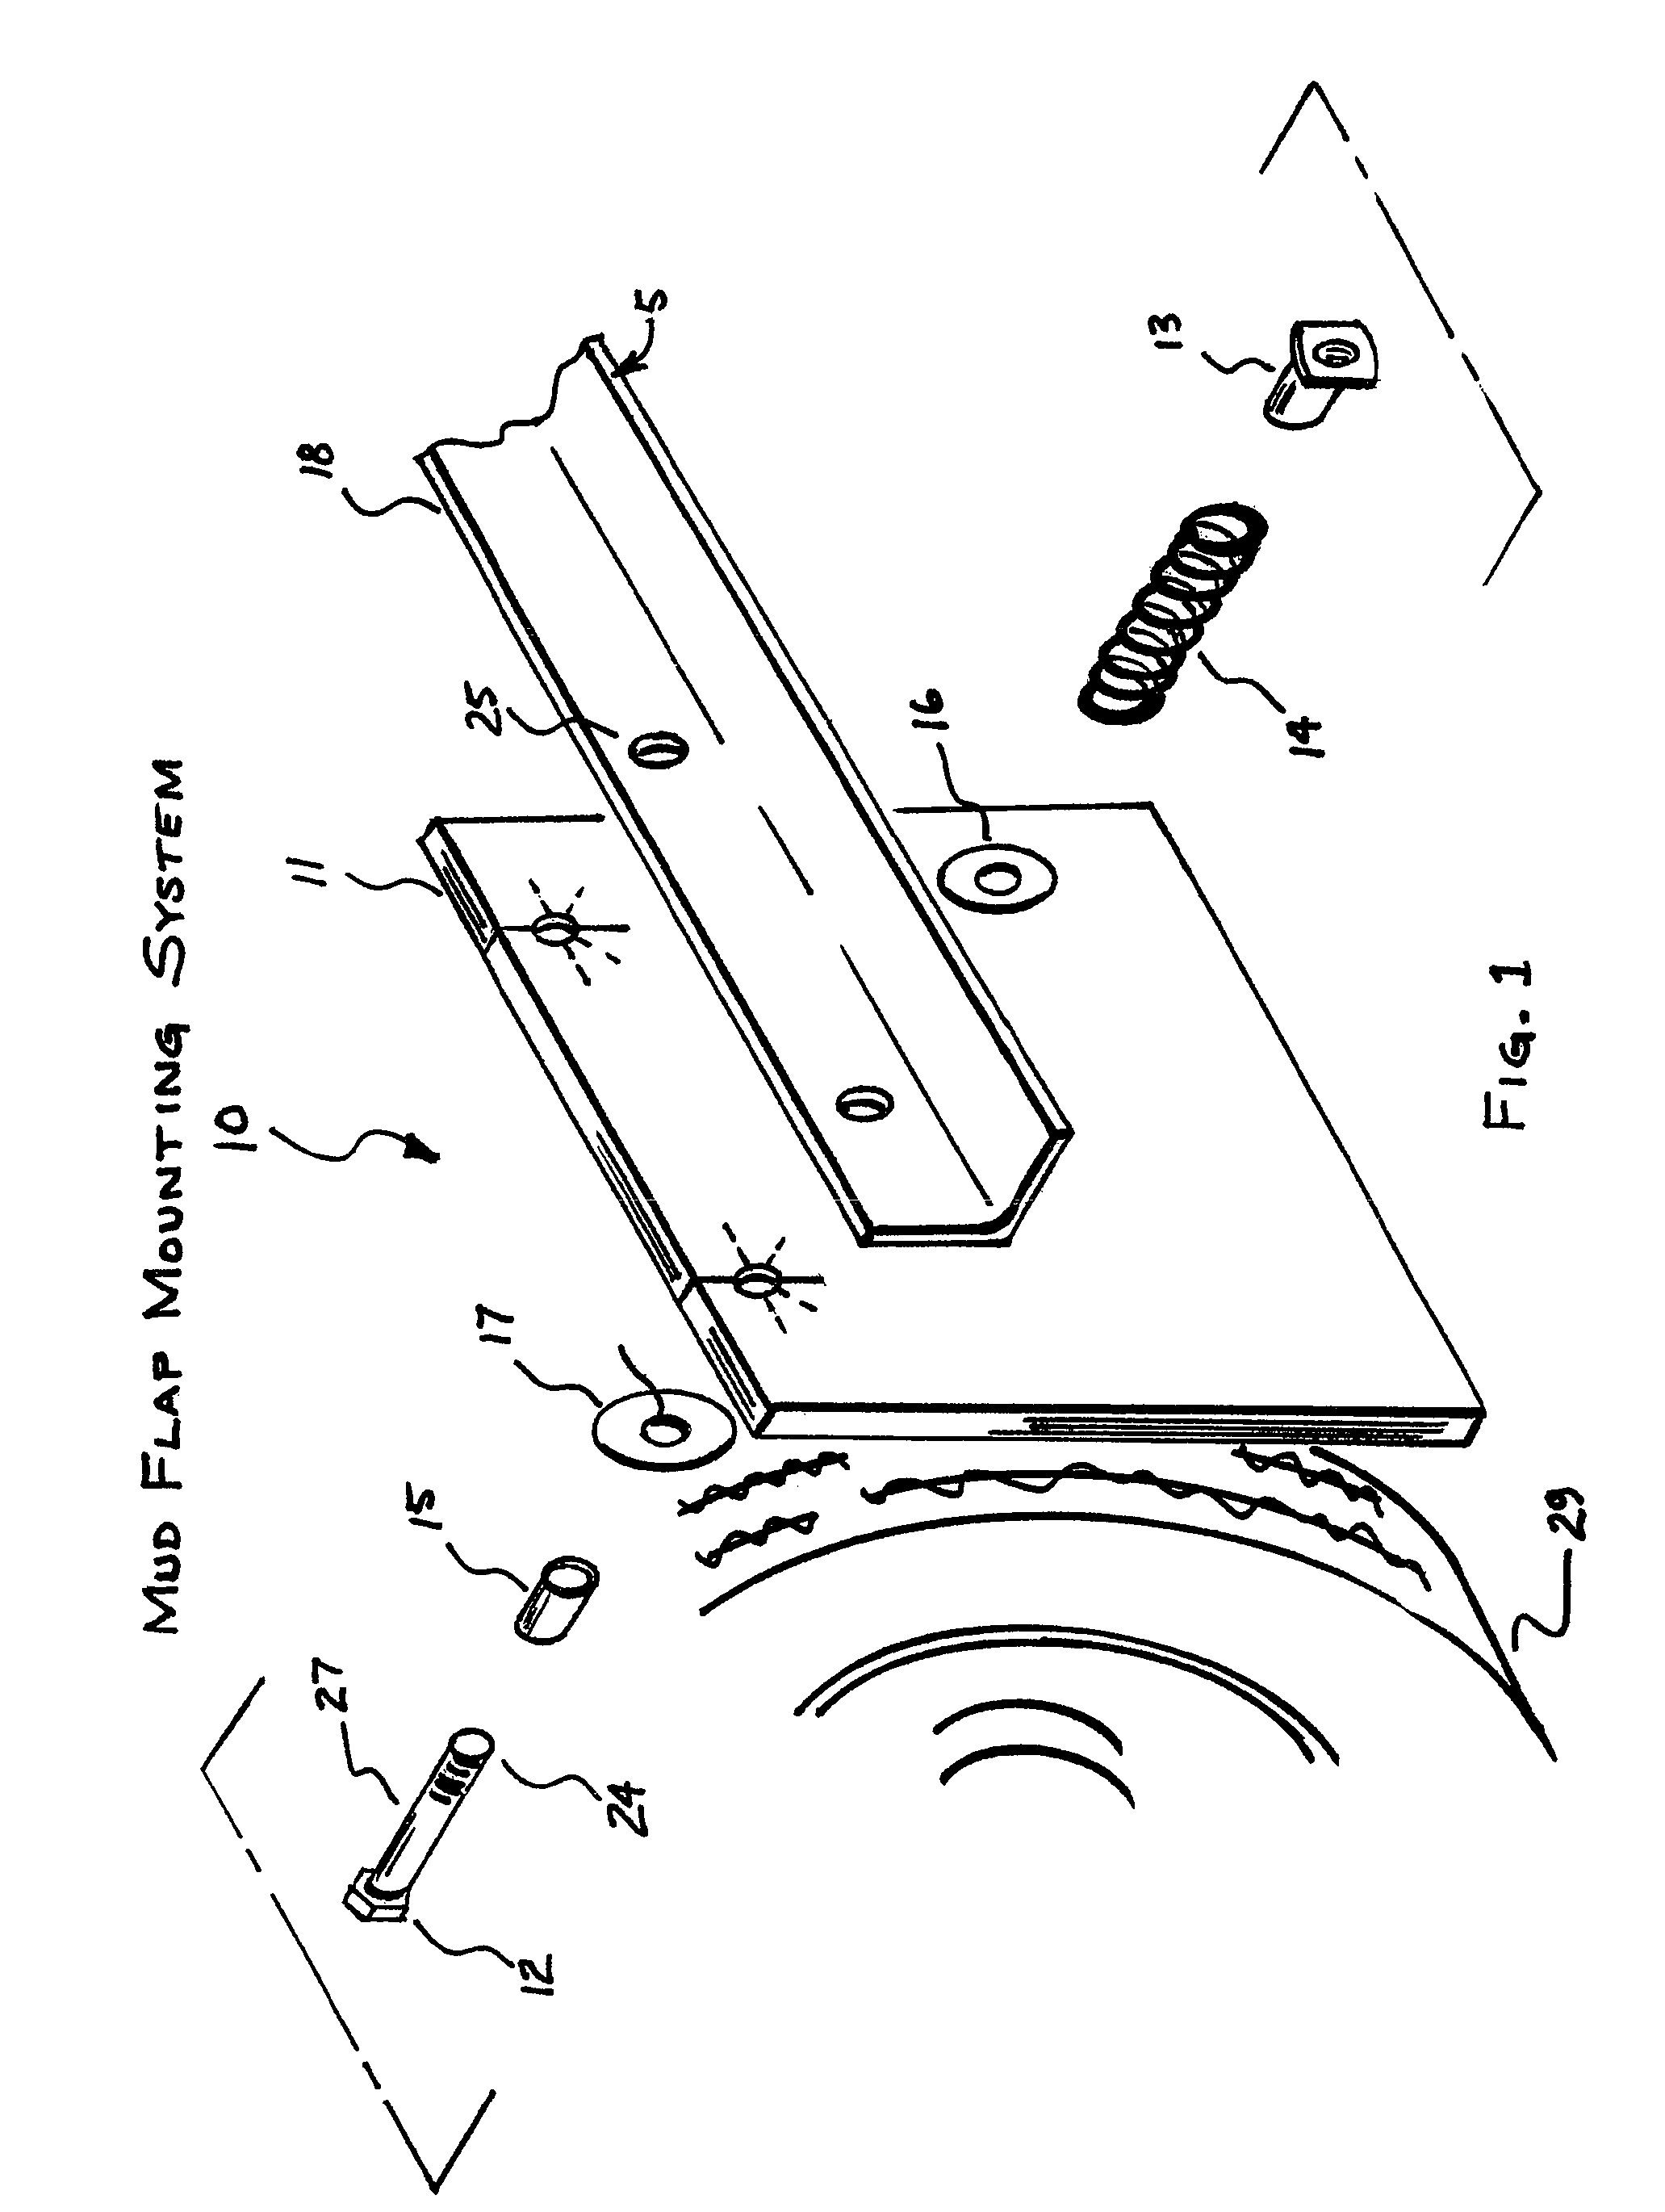 Apparatus and method for mounting mud flaps on a vehicle